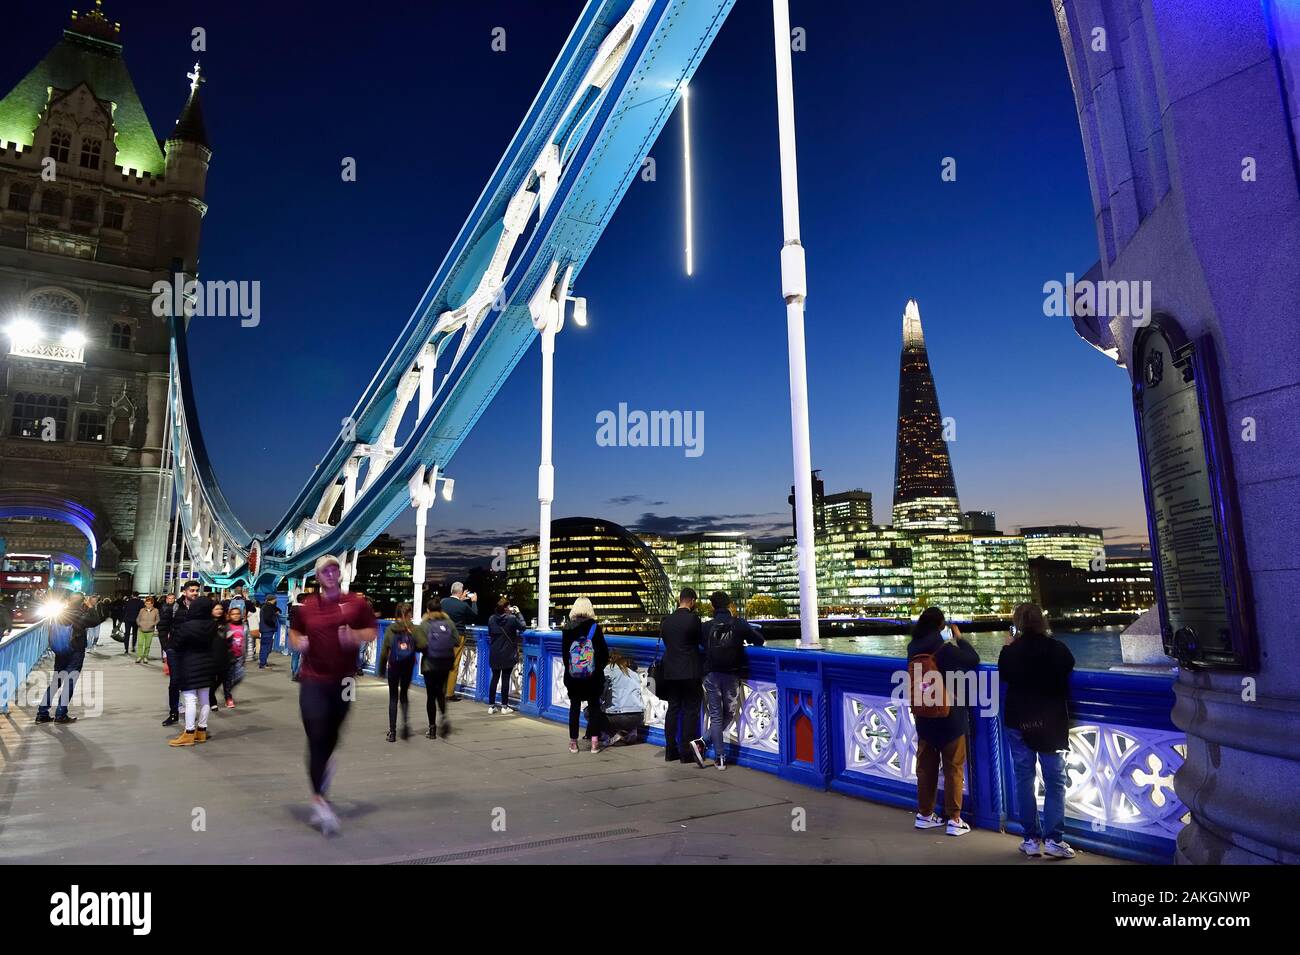 United Kingdom, London, Tower Bridge, lift bridge crossing the Thames, between the districts of Southwark and Tower Hamlets and the Shard London Bridge Tower by architect Renzo Piano, the tallest tower in London Stock Photo